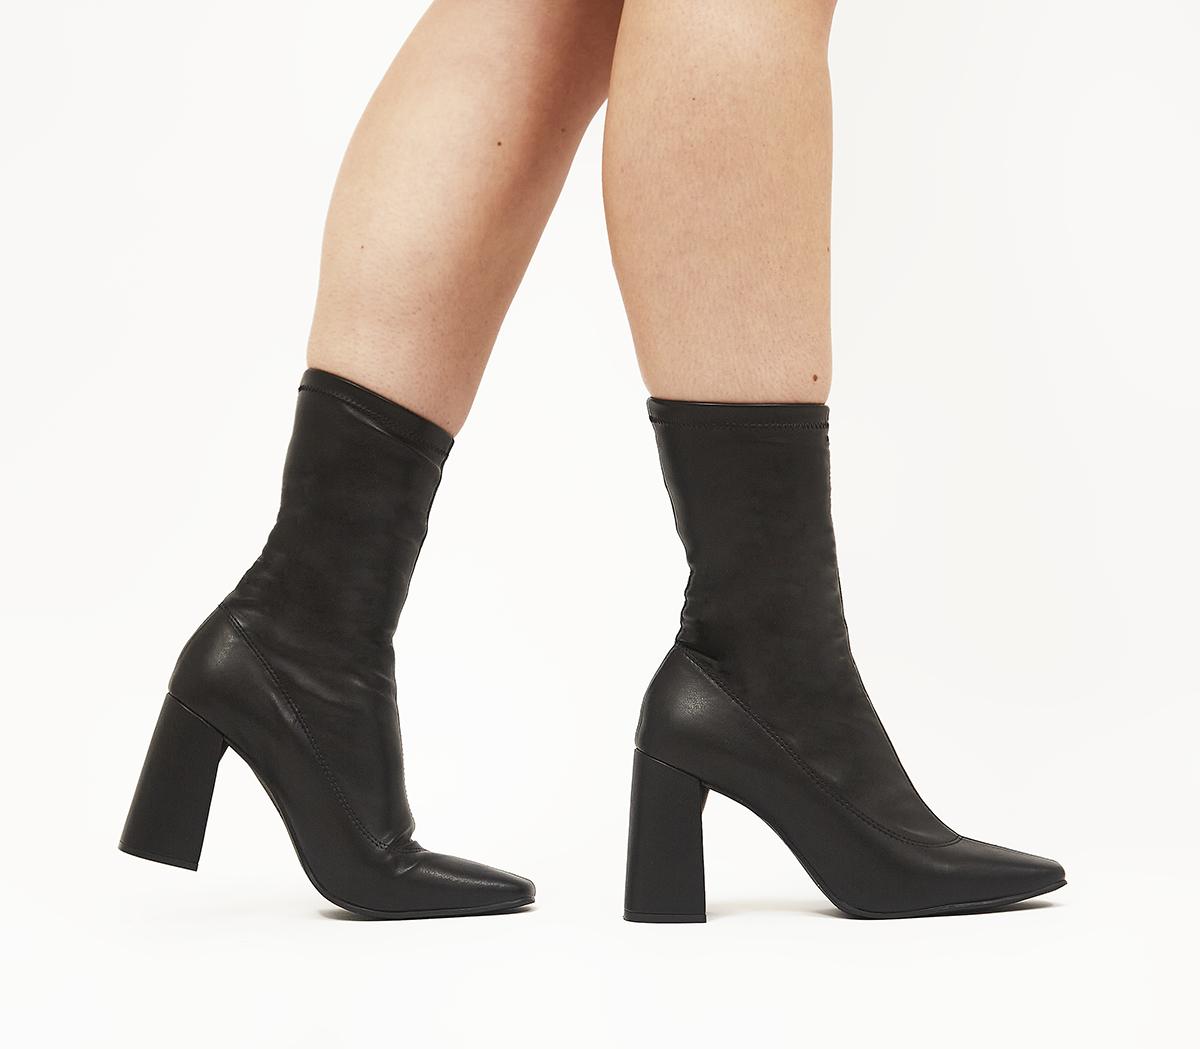 OFFICE Activate Heeled Sock Boots Black Faux Leather - Women's Ankle Boots